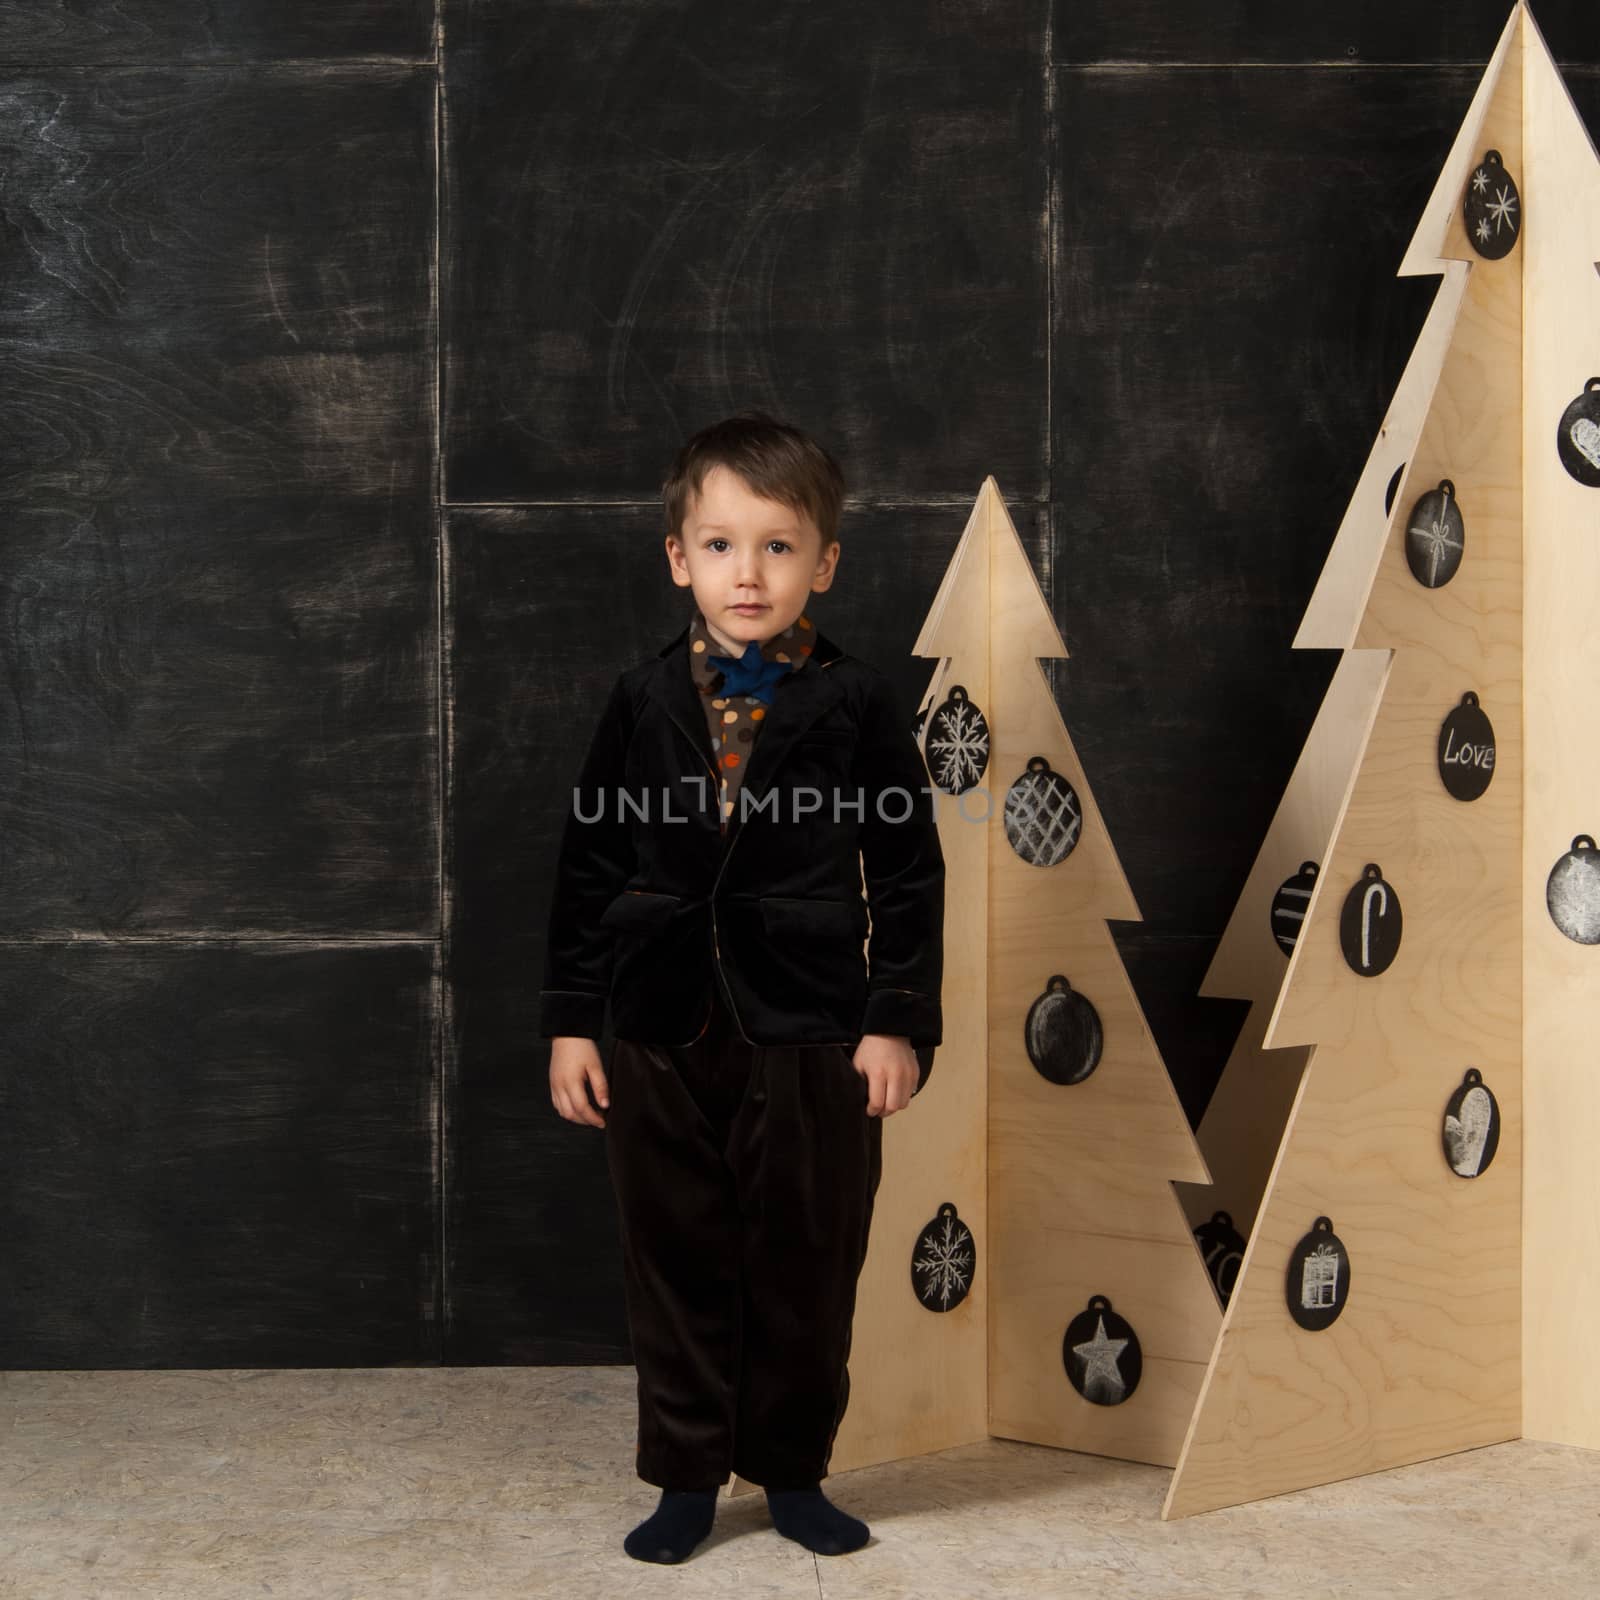 the little boy next to decorative Christmas trees by A_Karim